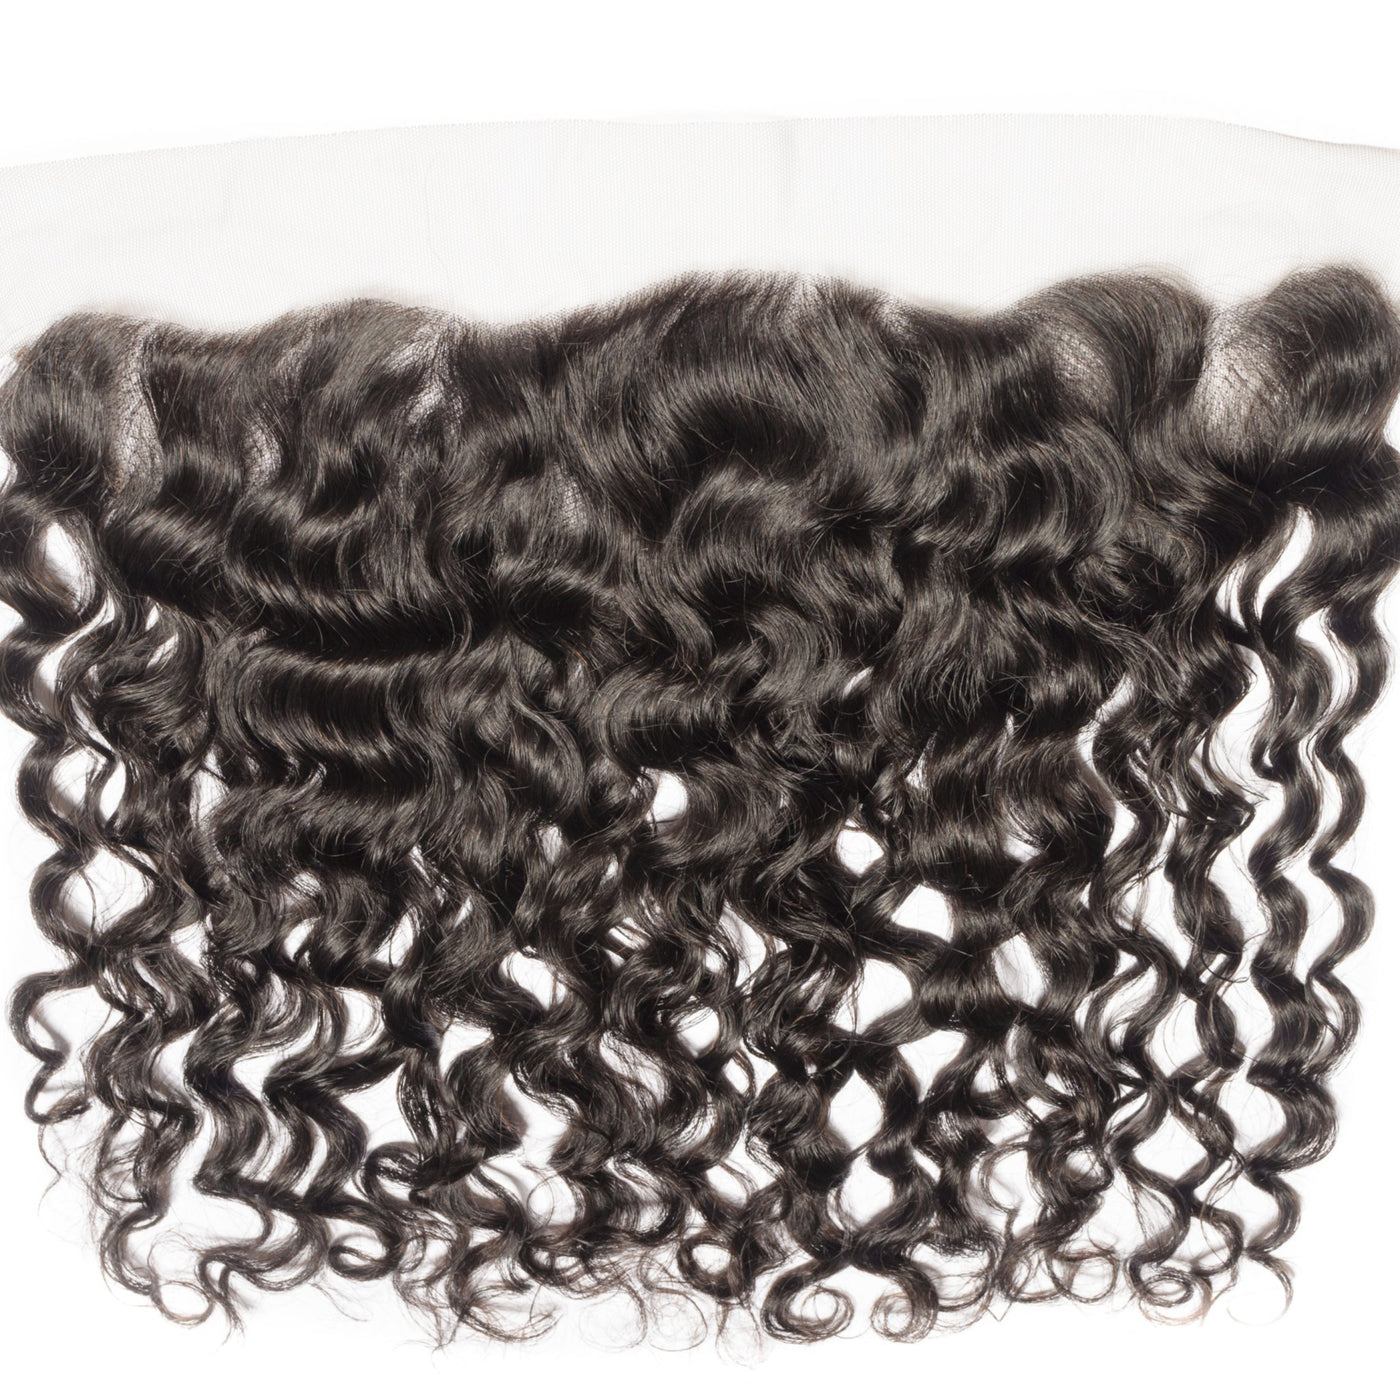 Curly Raw Glam IndiancLace Frontals - Bundles and Drops of Glam